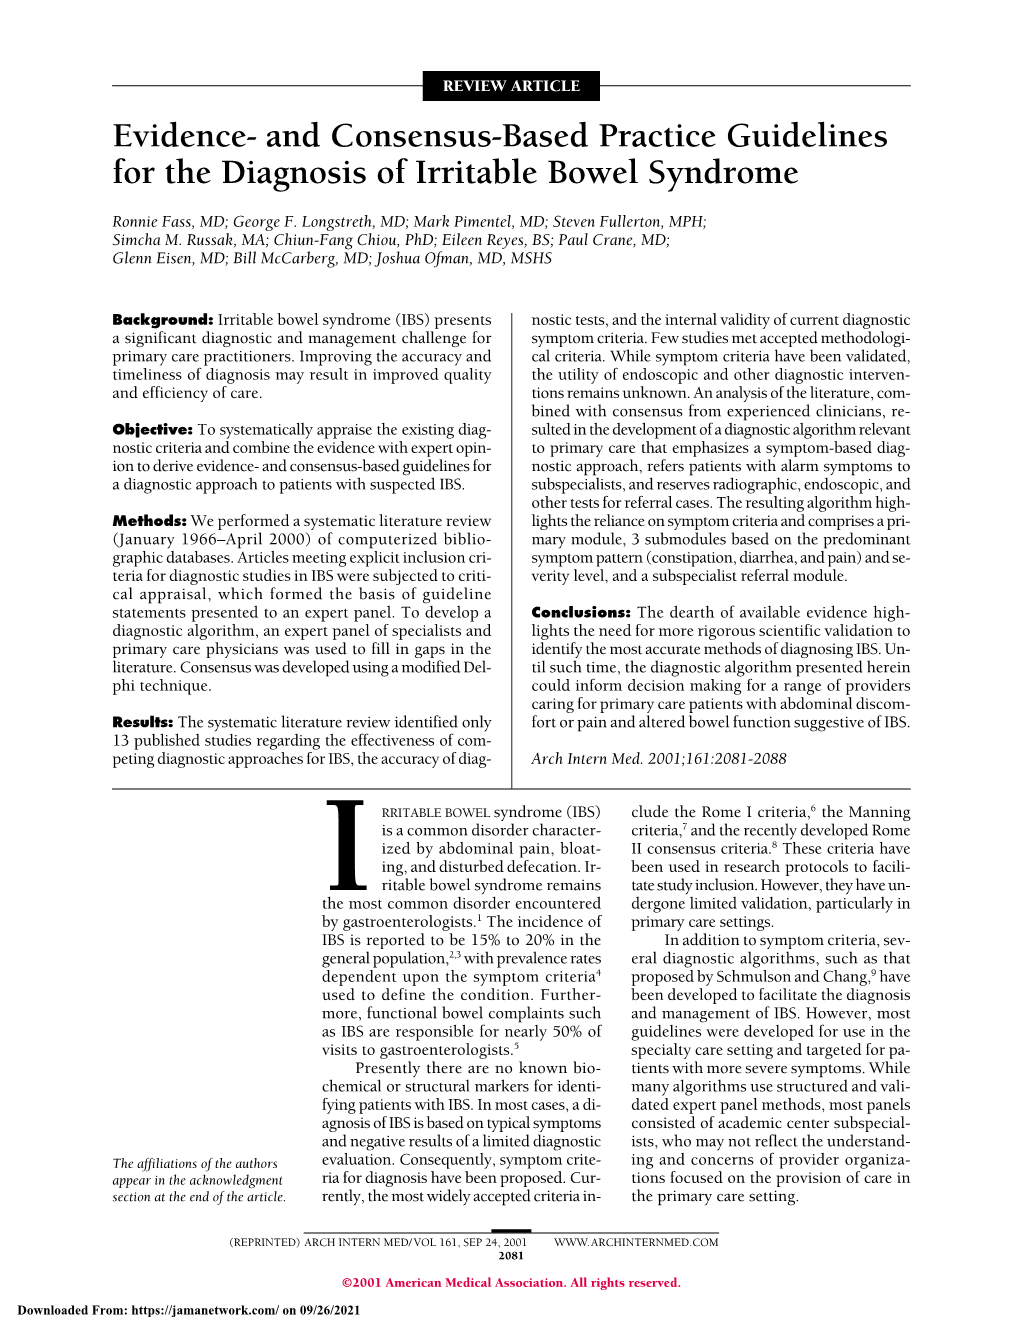 And Consensus-Based Practice Guidelines for the Diagnosis of Irritable Bowel Syndrome